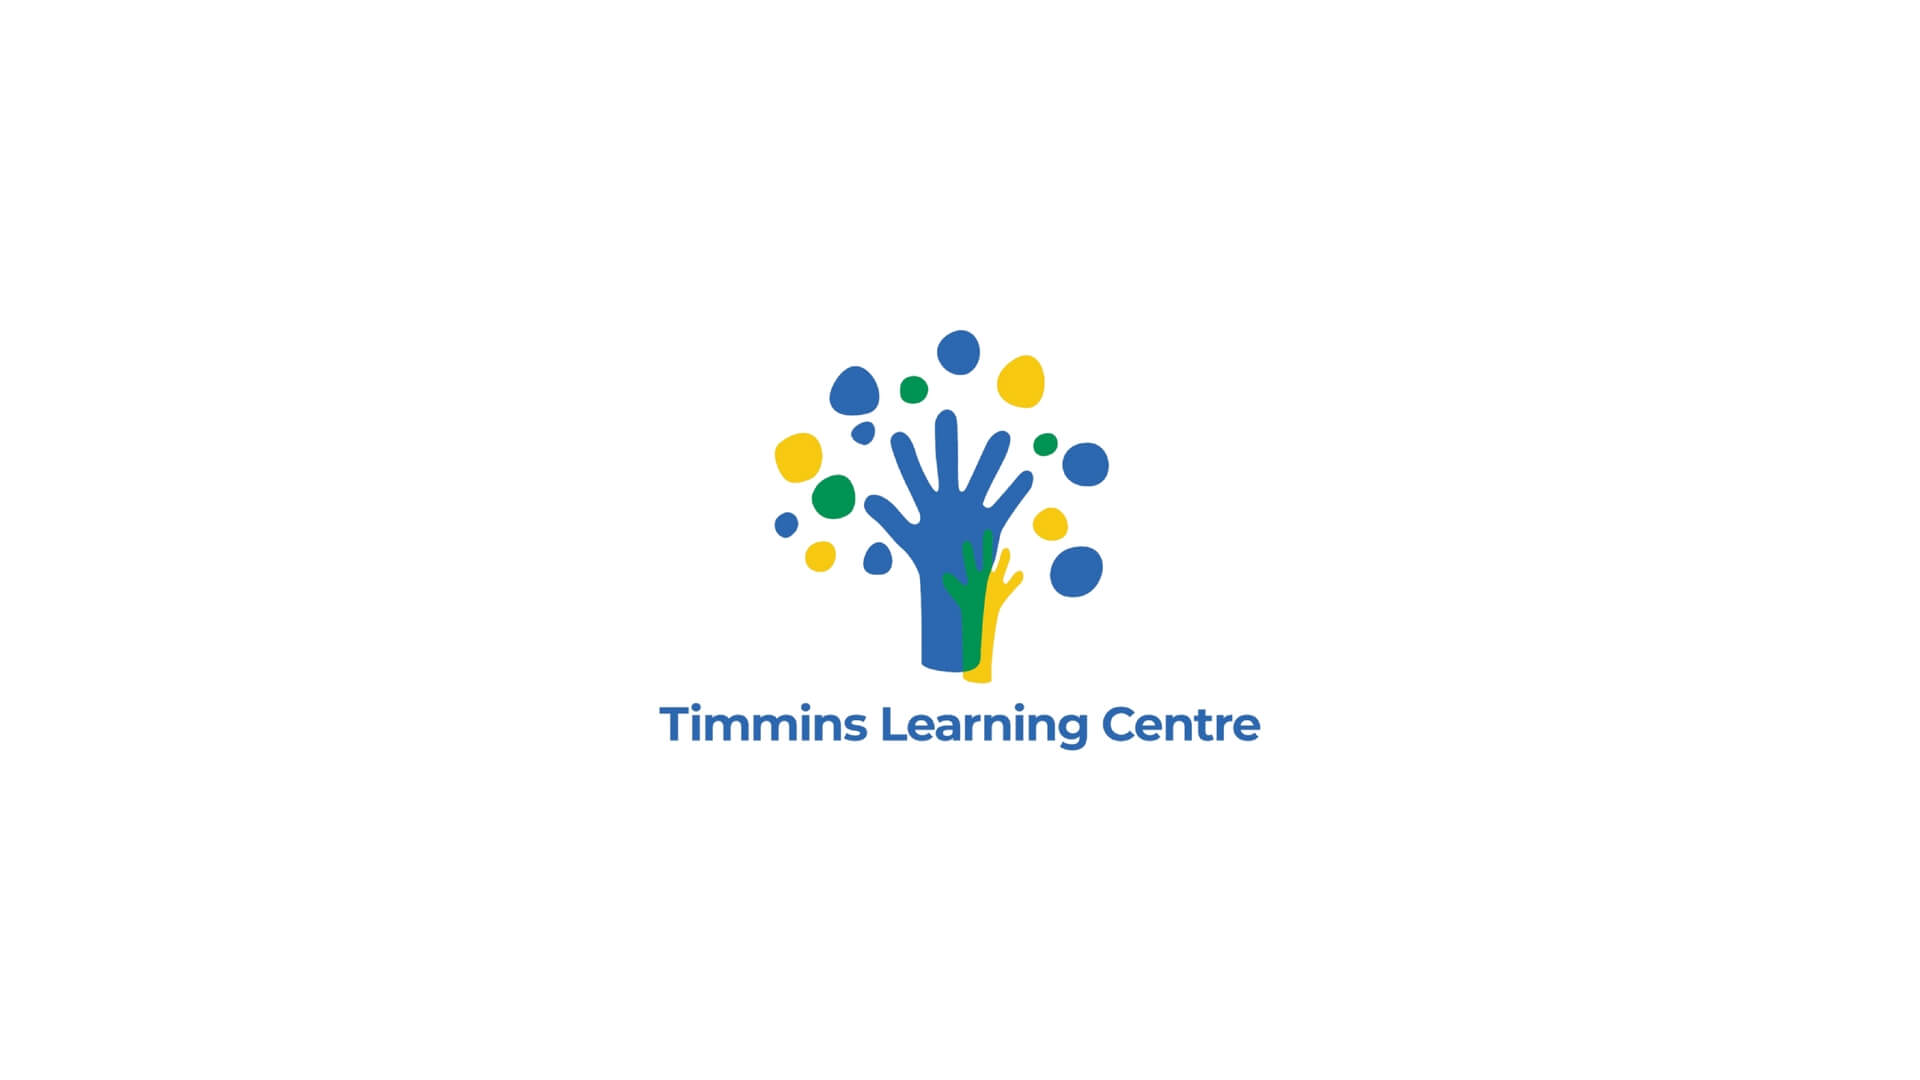 Timmins Care Logo of timmins learning centre featuring a stylized tree with colorful circles as leaves, accompanied by the center's name below. Cochrane District Social Services Administration Board